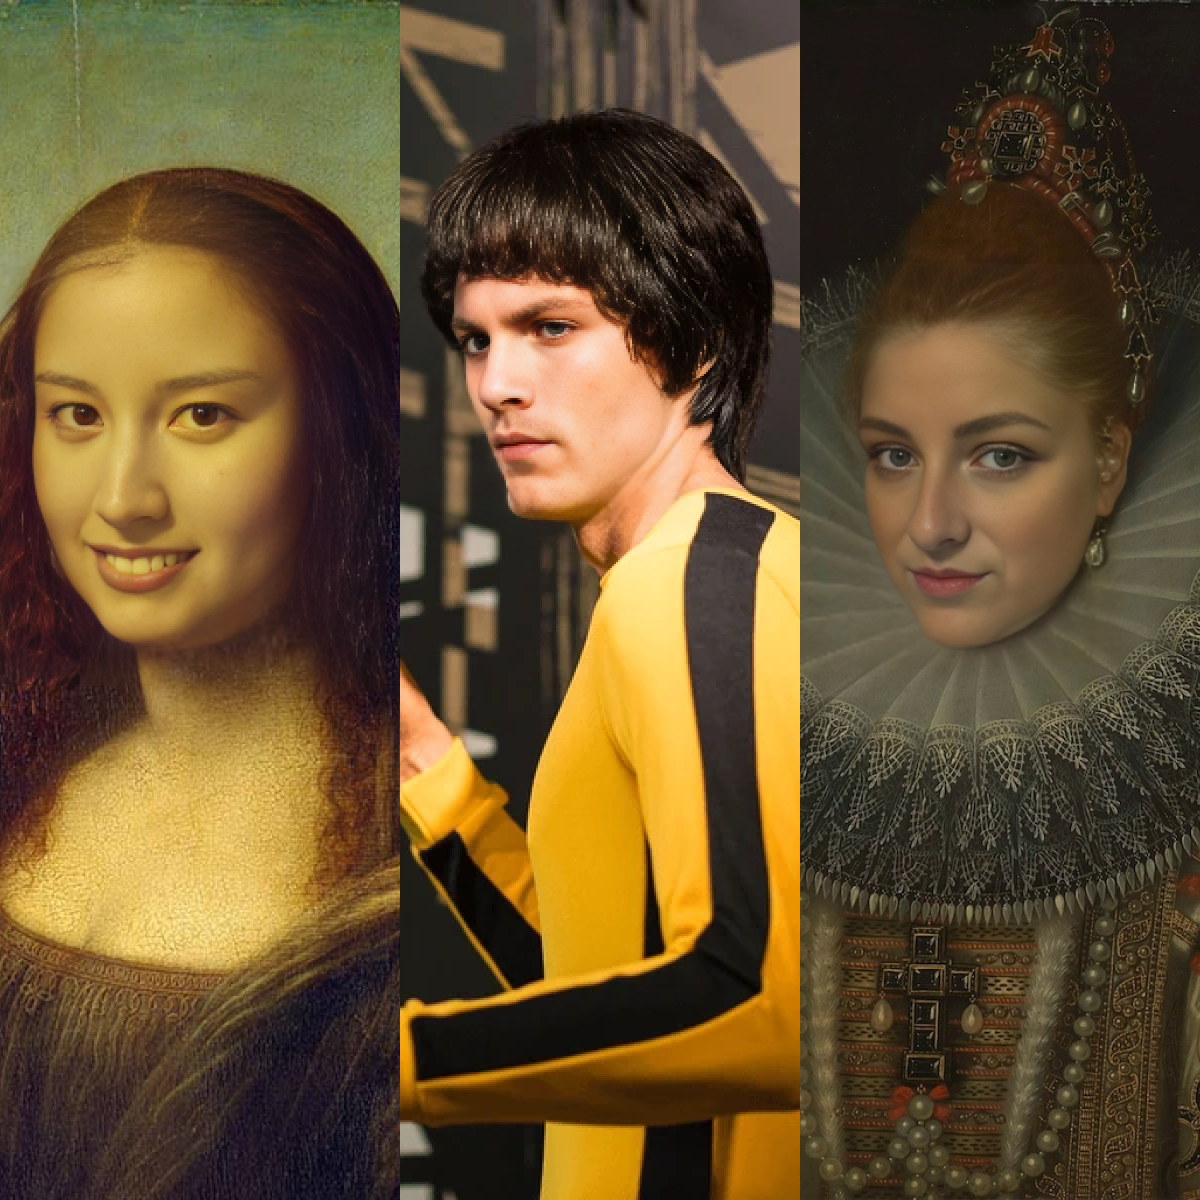 AI-generated face swap images of art, movies, and celebs, made online.